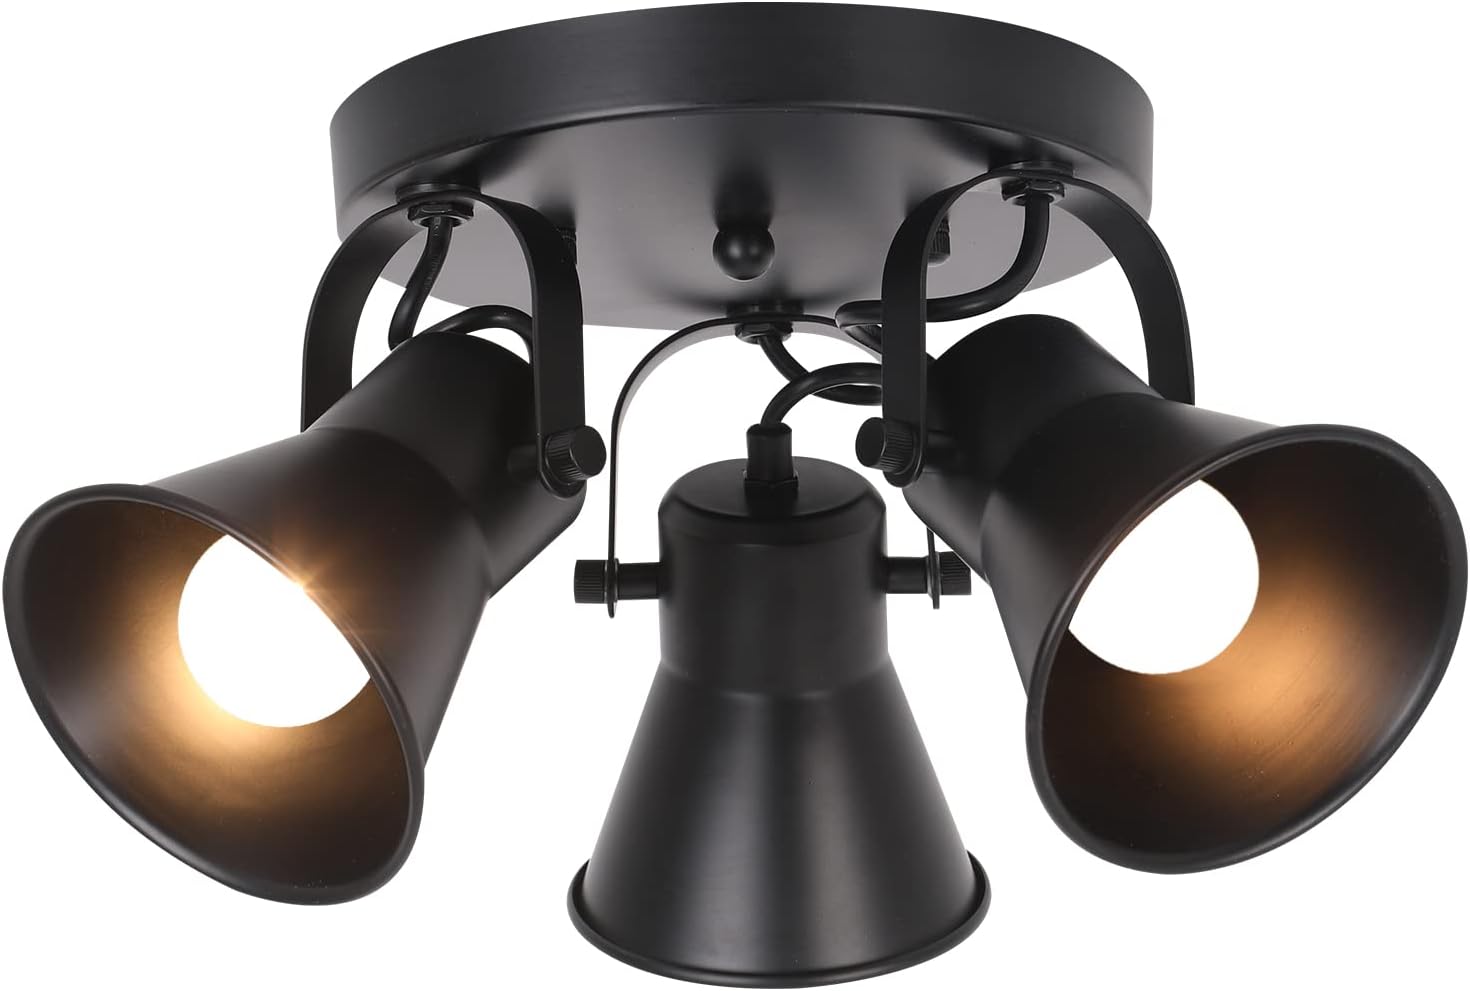 SEEBLEN 3-Light Industrial Track Lighting: A Modern Illumination Solution for Your Home